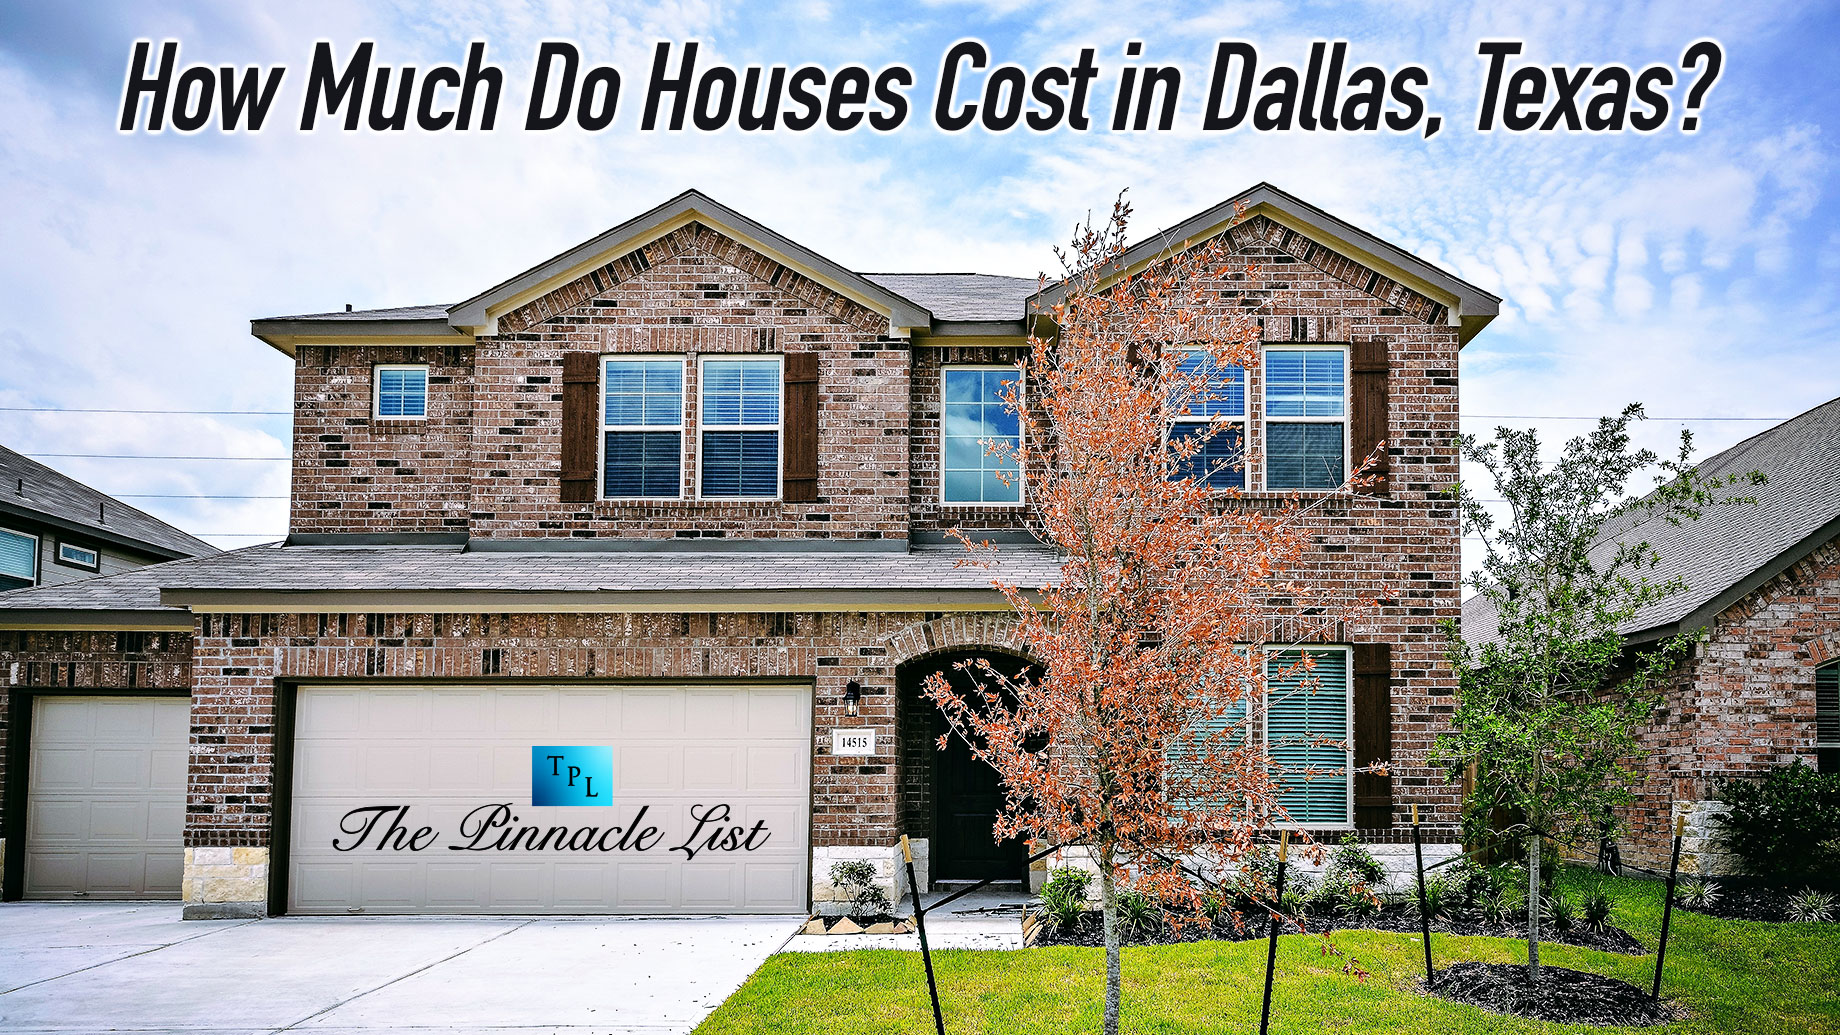 How Much Do Houses Cost in Dallas, Texas?